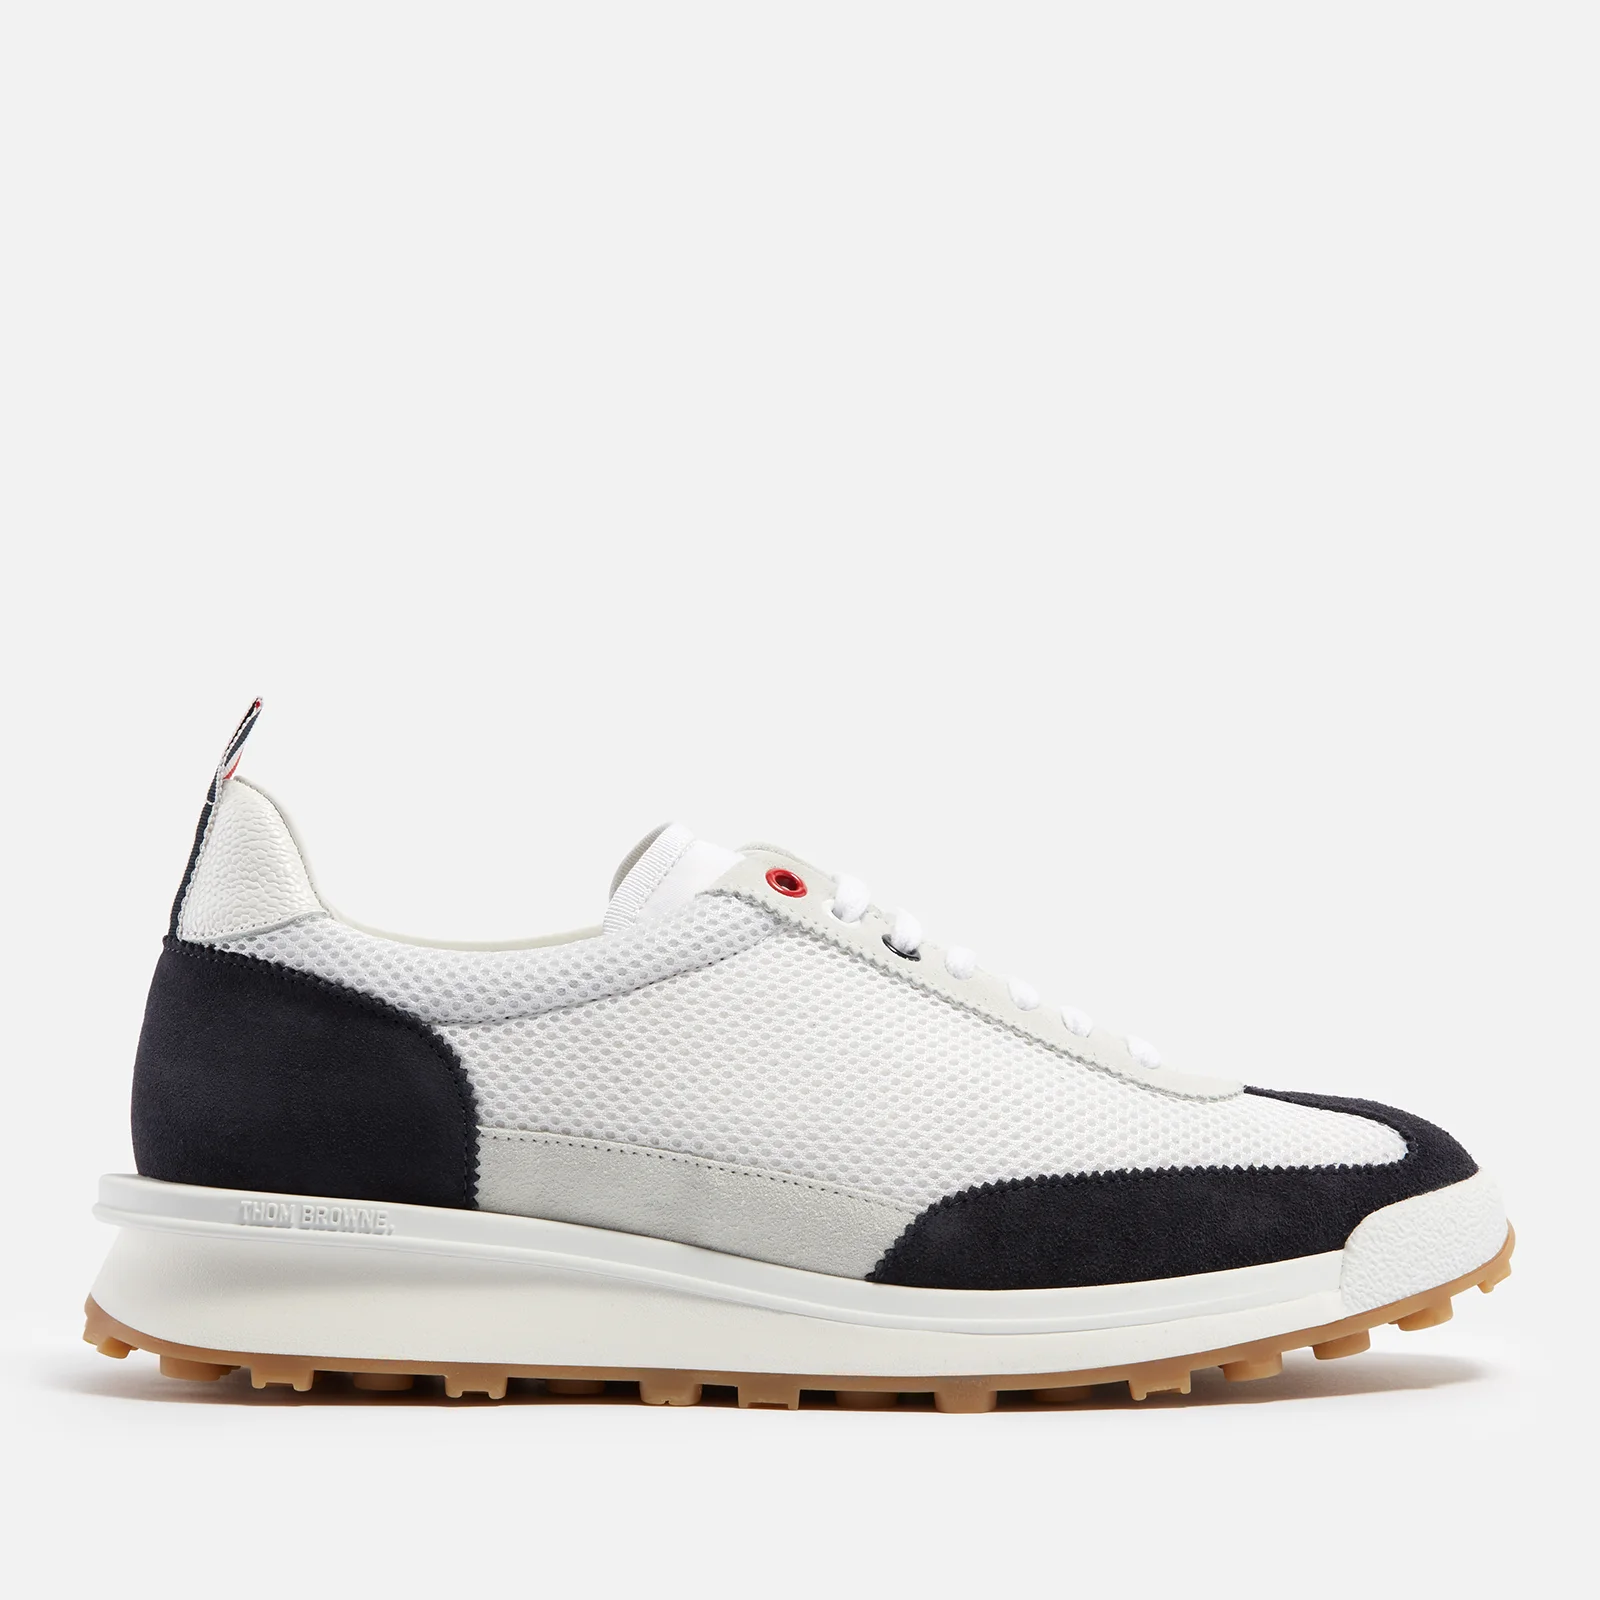 Thom Browne Men's Suede and Mesh Trainers Image 1